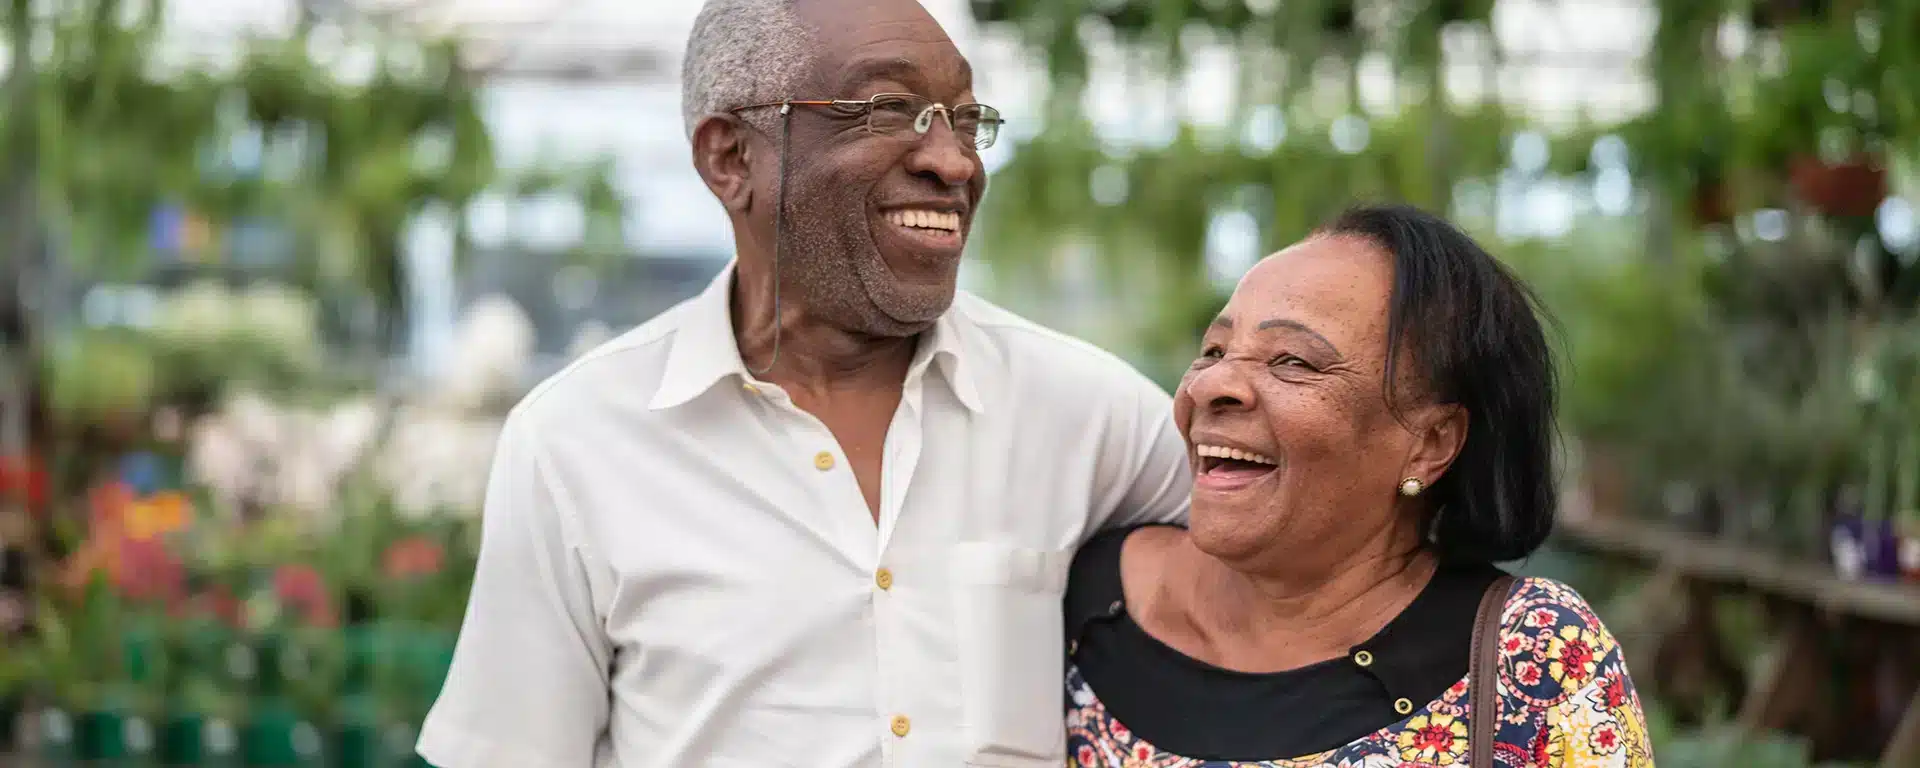 A senior man and woman side by side, smiling together.